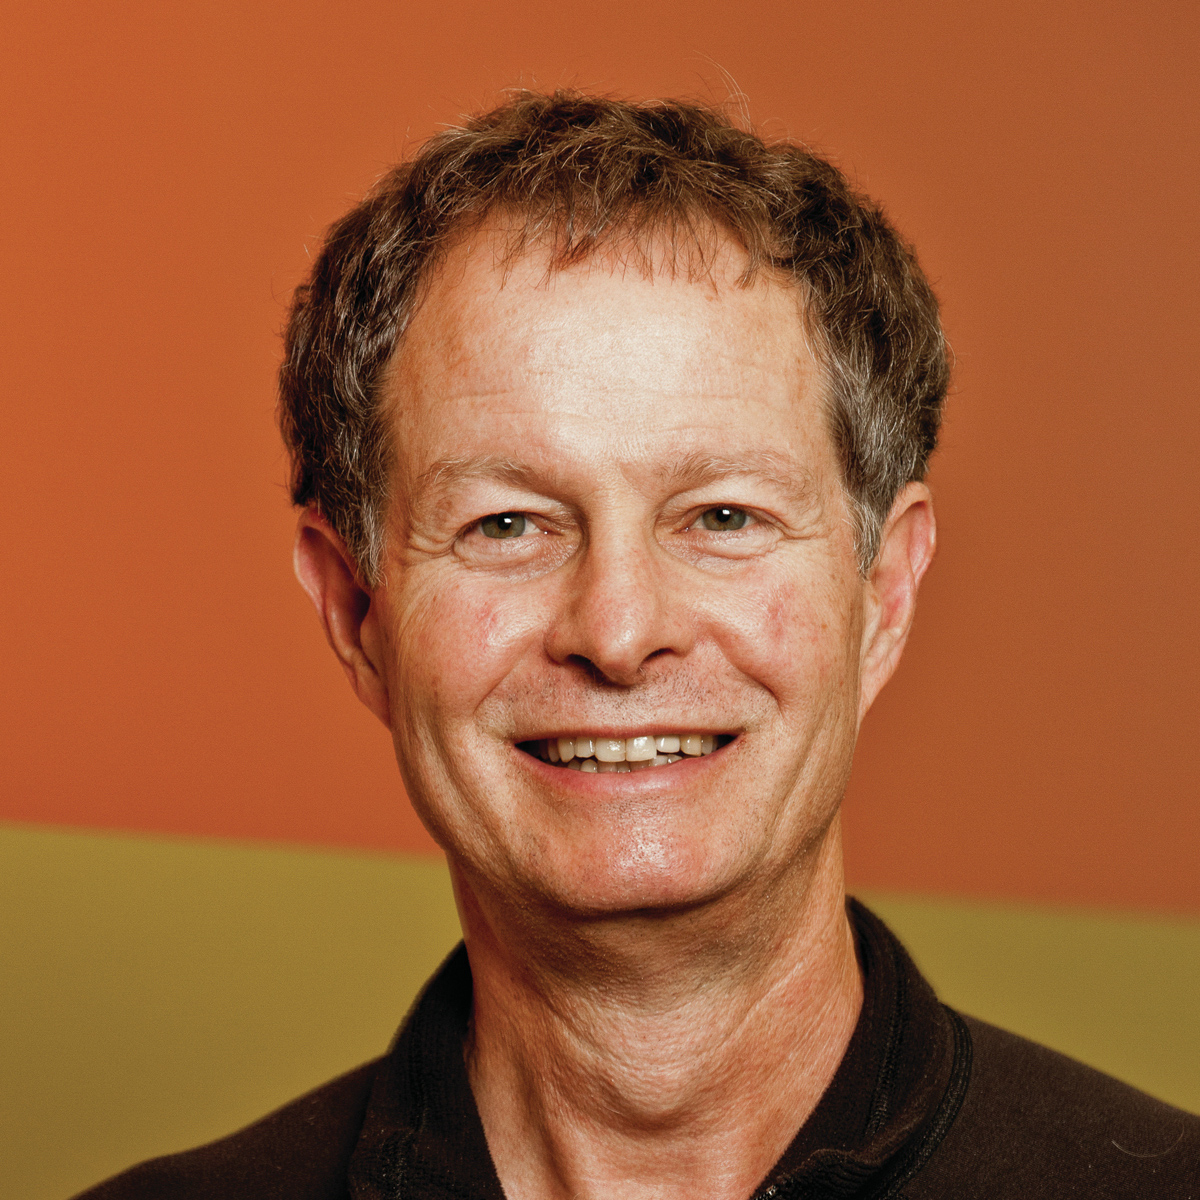 John Mackey is co-CEO and co-founder of Whole Foods Market and co-founder of the nonprofit Conscious Capitalism, Inc.